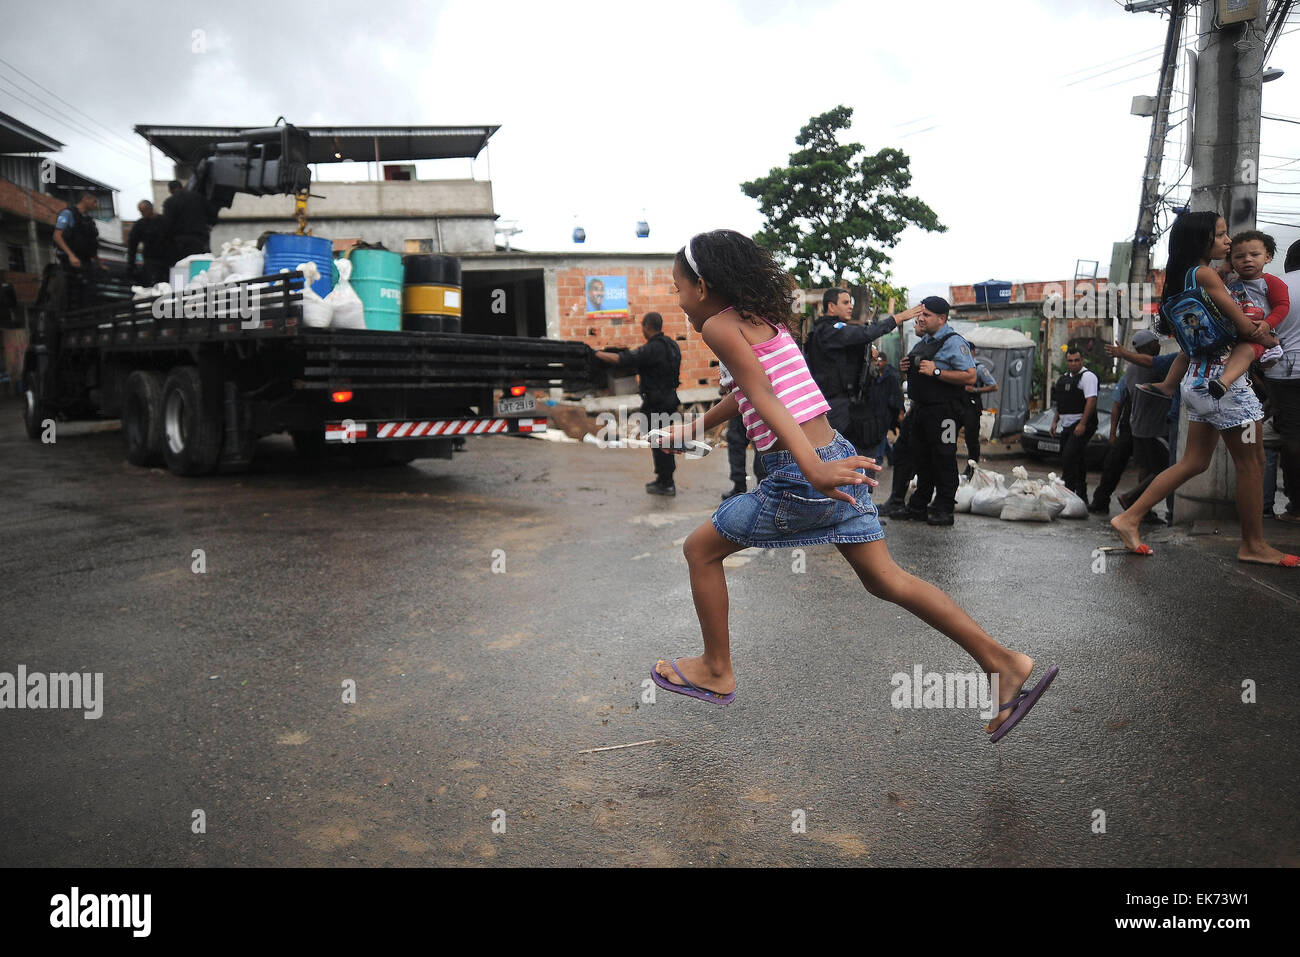 Brazil. 07th Apr, 2015. Military police conducts beat patrol and set up armed base in Complexo do Alemão, in the north of Rio de Janeiro. The show of force is said to be helping the community in tackling drug trafficking and drug related crime. © Fabio Teixeira/Pacific Press/Alamy Live News Stock Photo